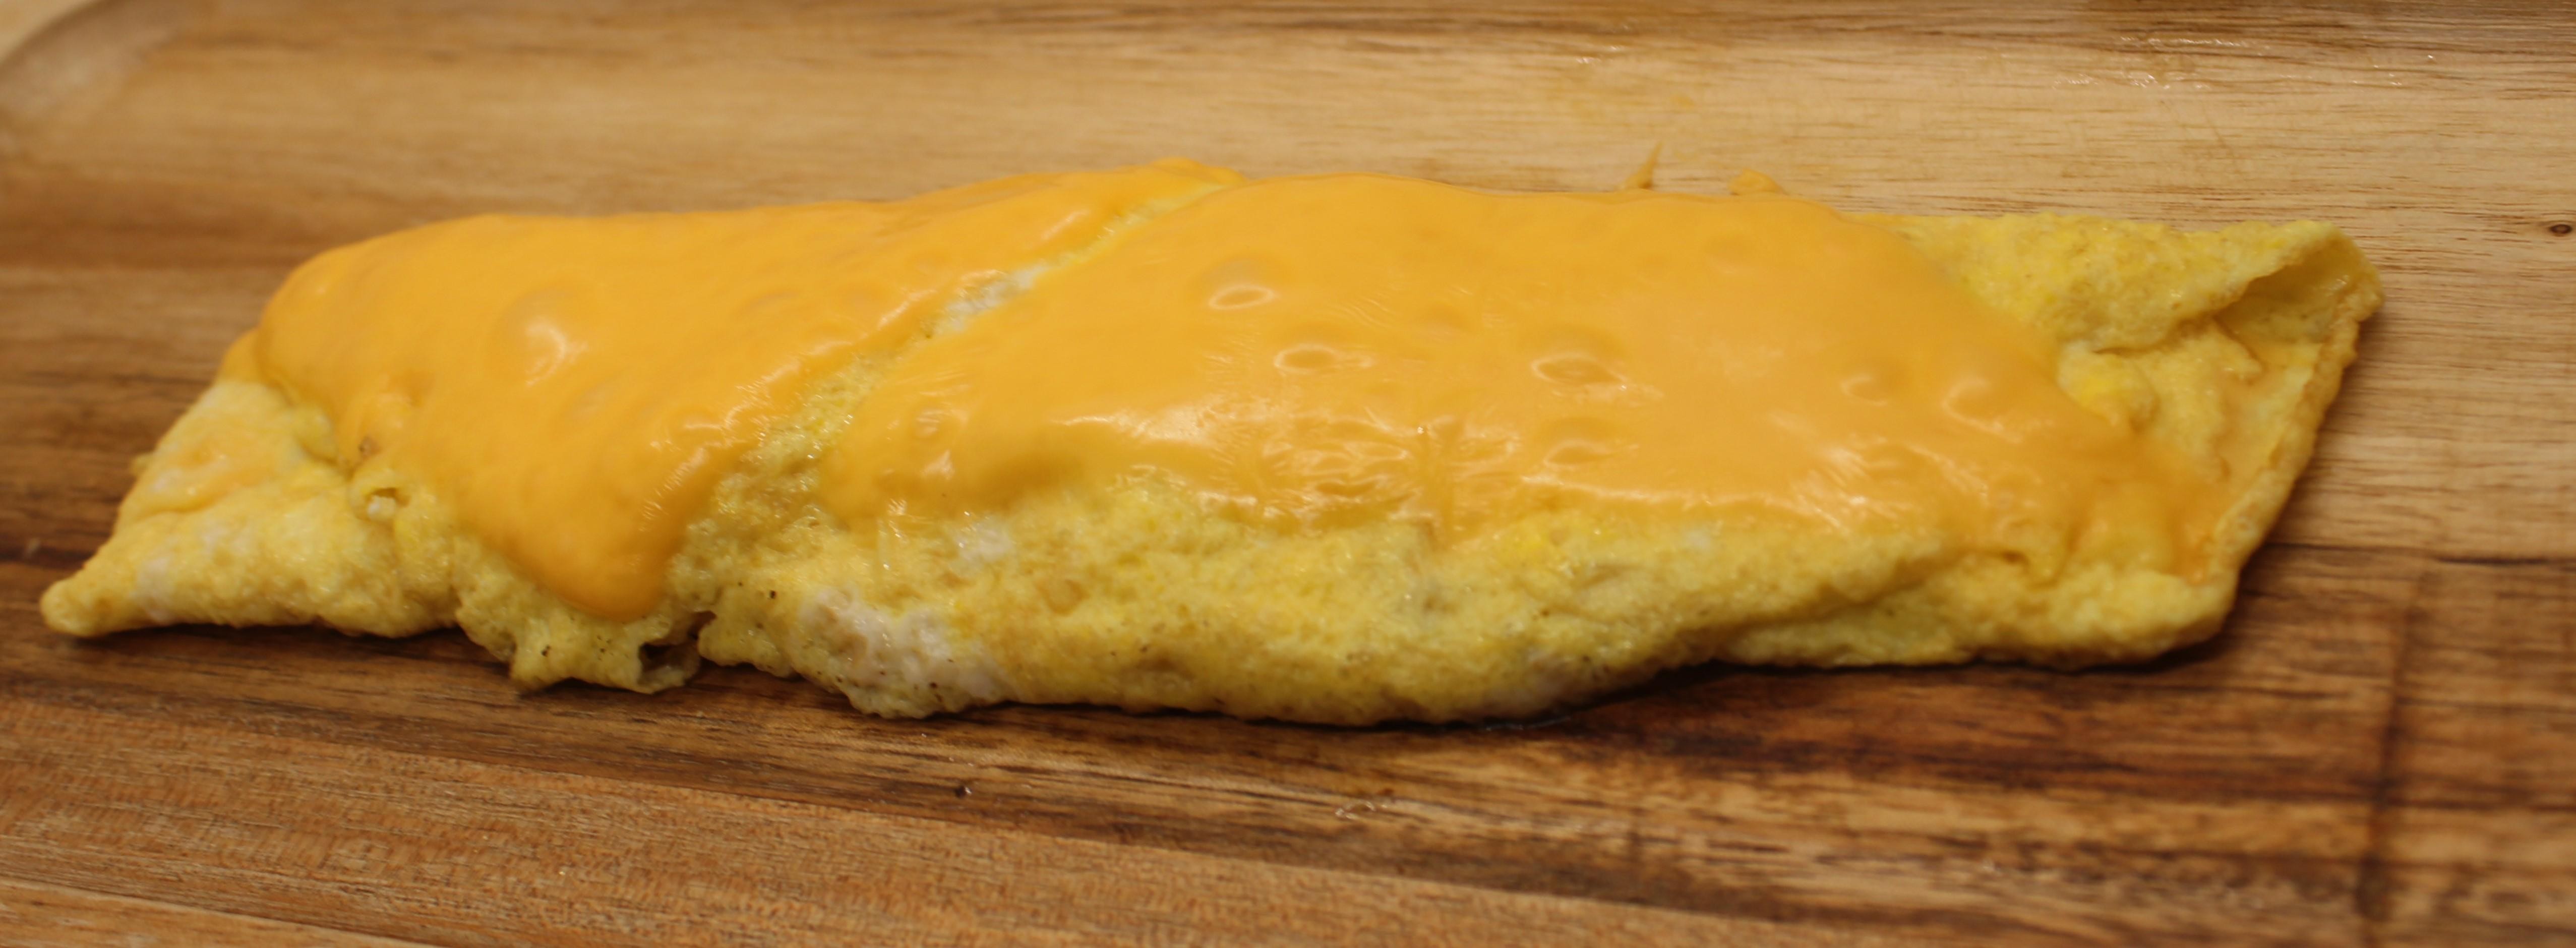 TWO EGG & CHEESE OMELET